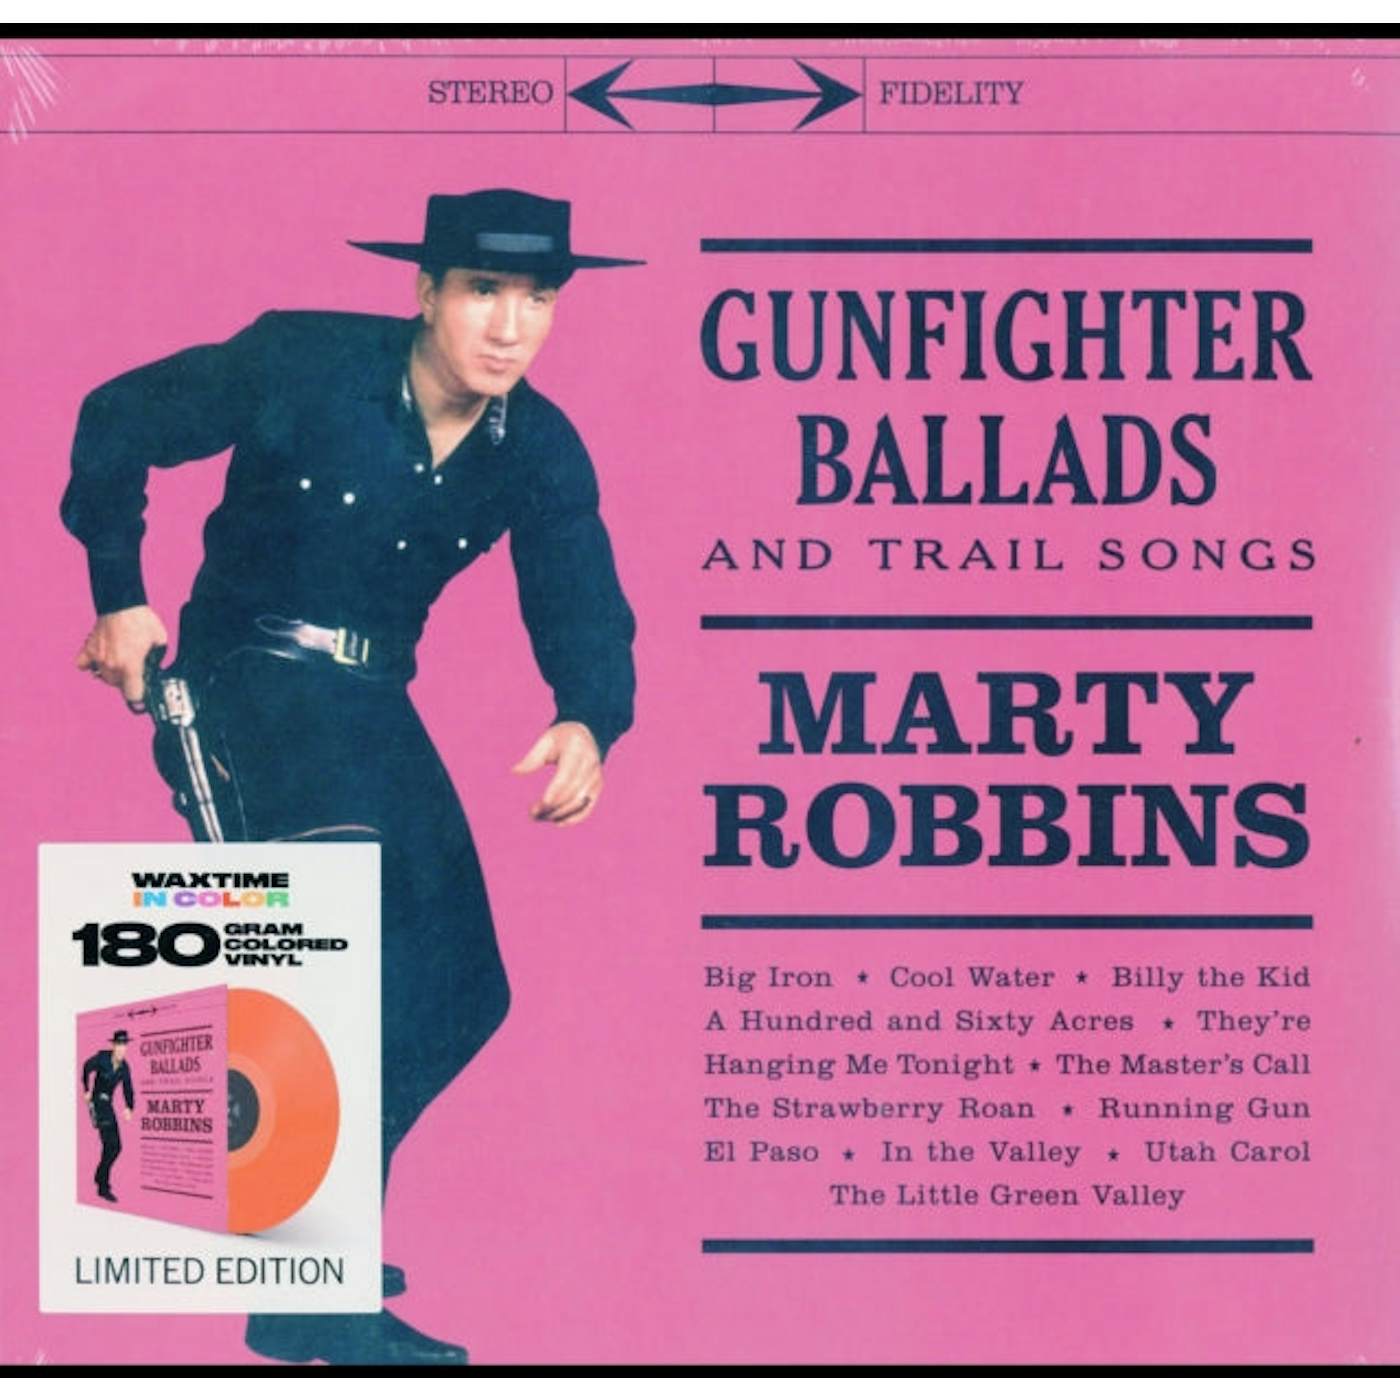 Marty Robbins LP Vinyl Record - Gunfighter Ballads & Trail Songs (Limited Solid Red Vinyl)